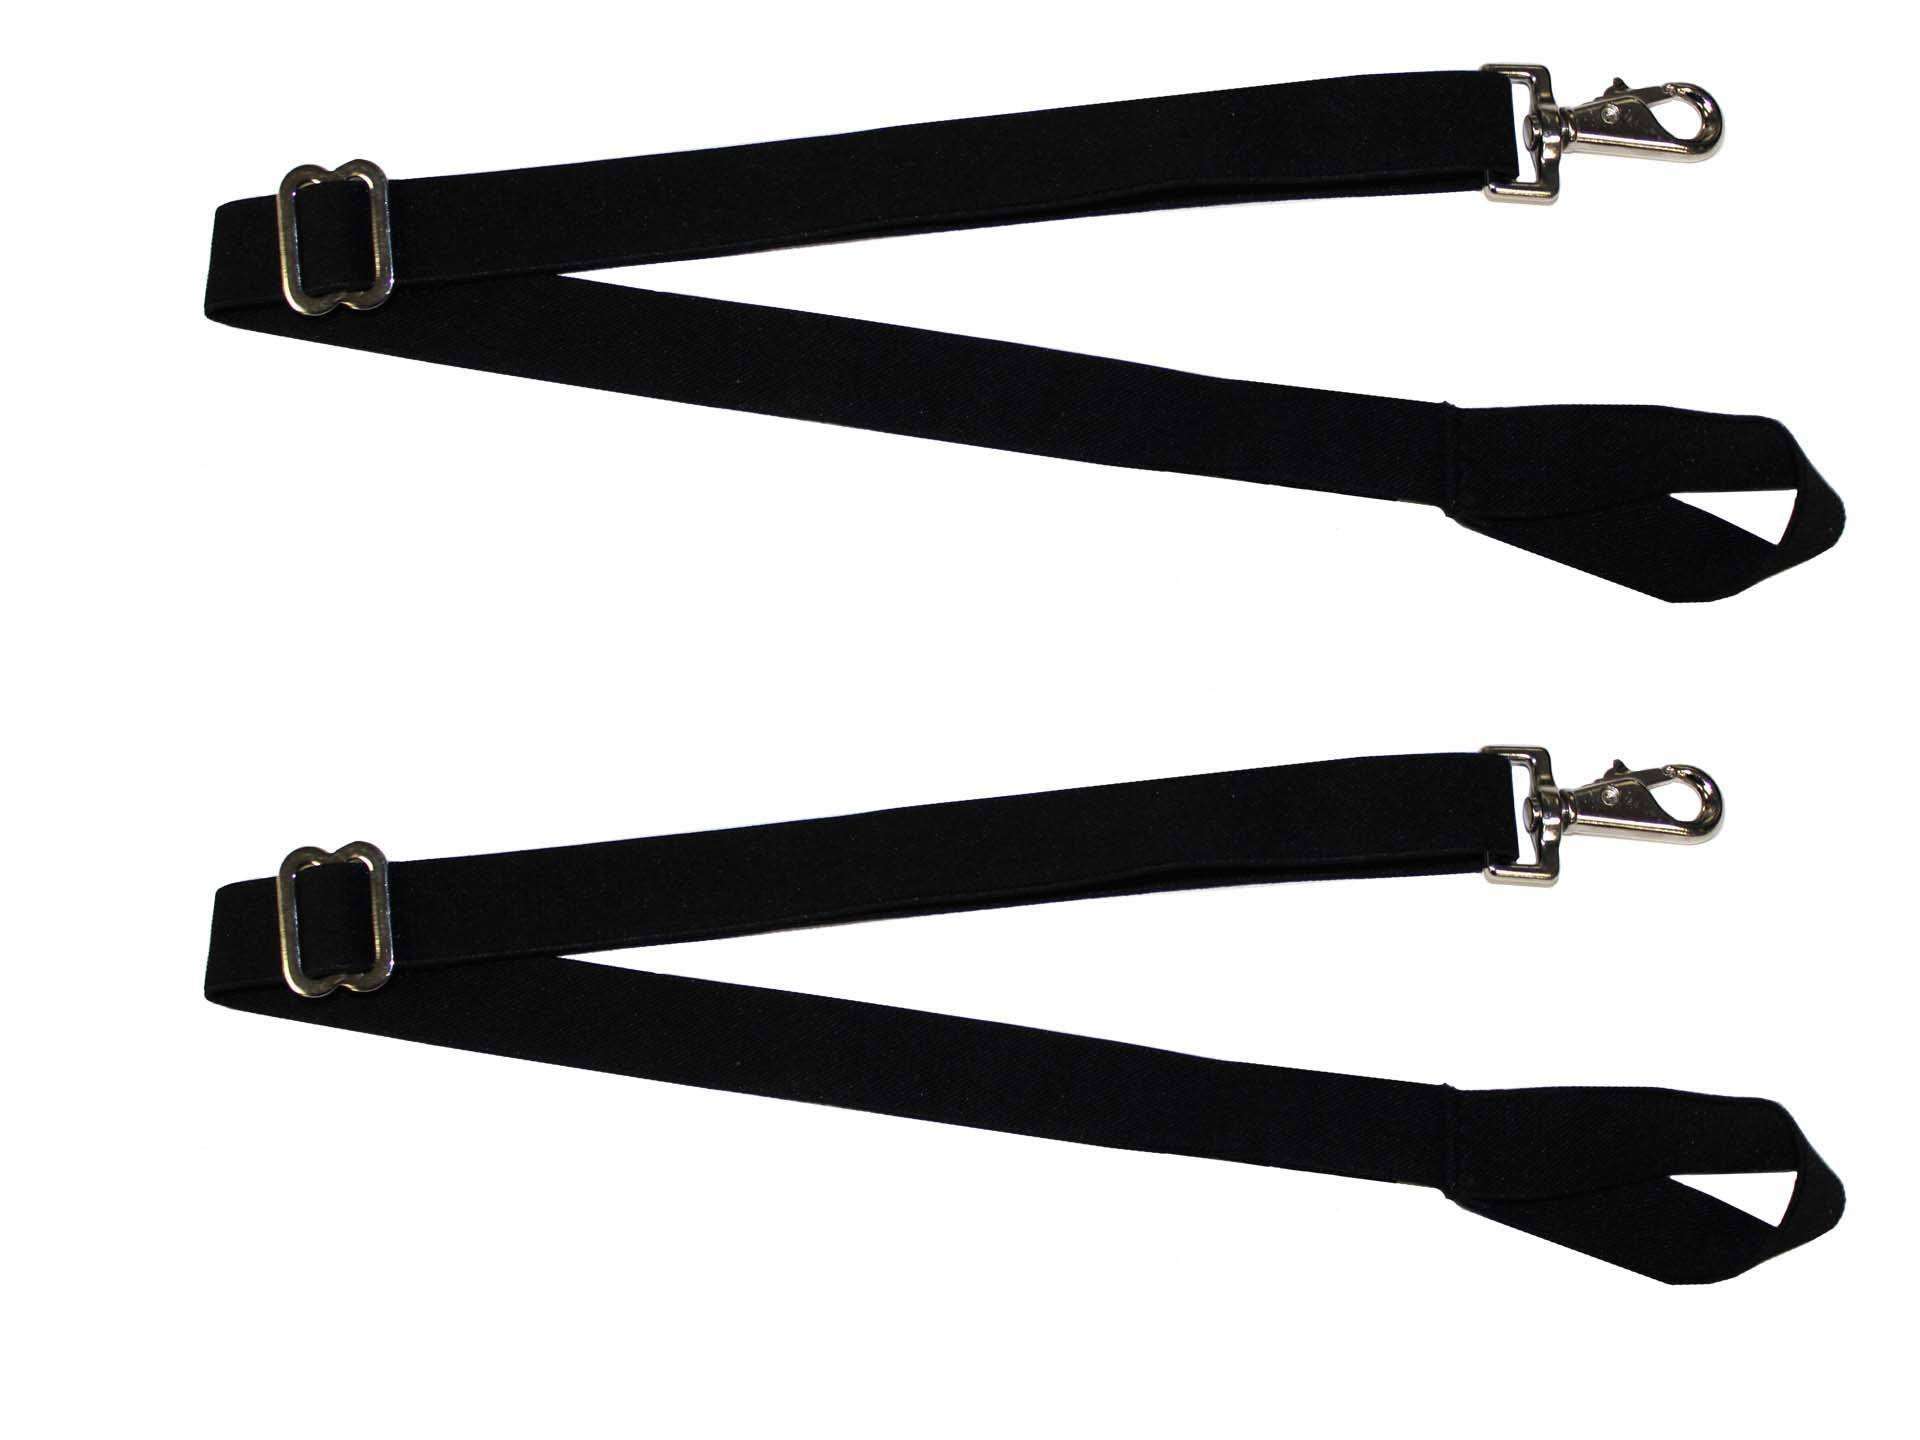  Magerdy Fields Horse Blanket Leg Straps Replacement - Includes  Horse Hoof Pick : 寵物用品